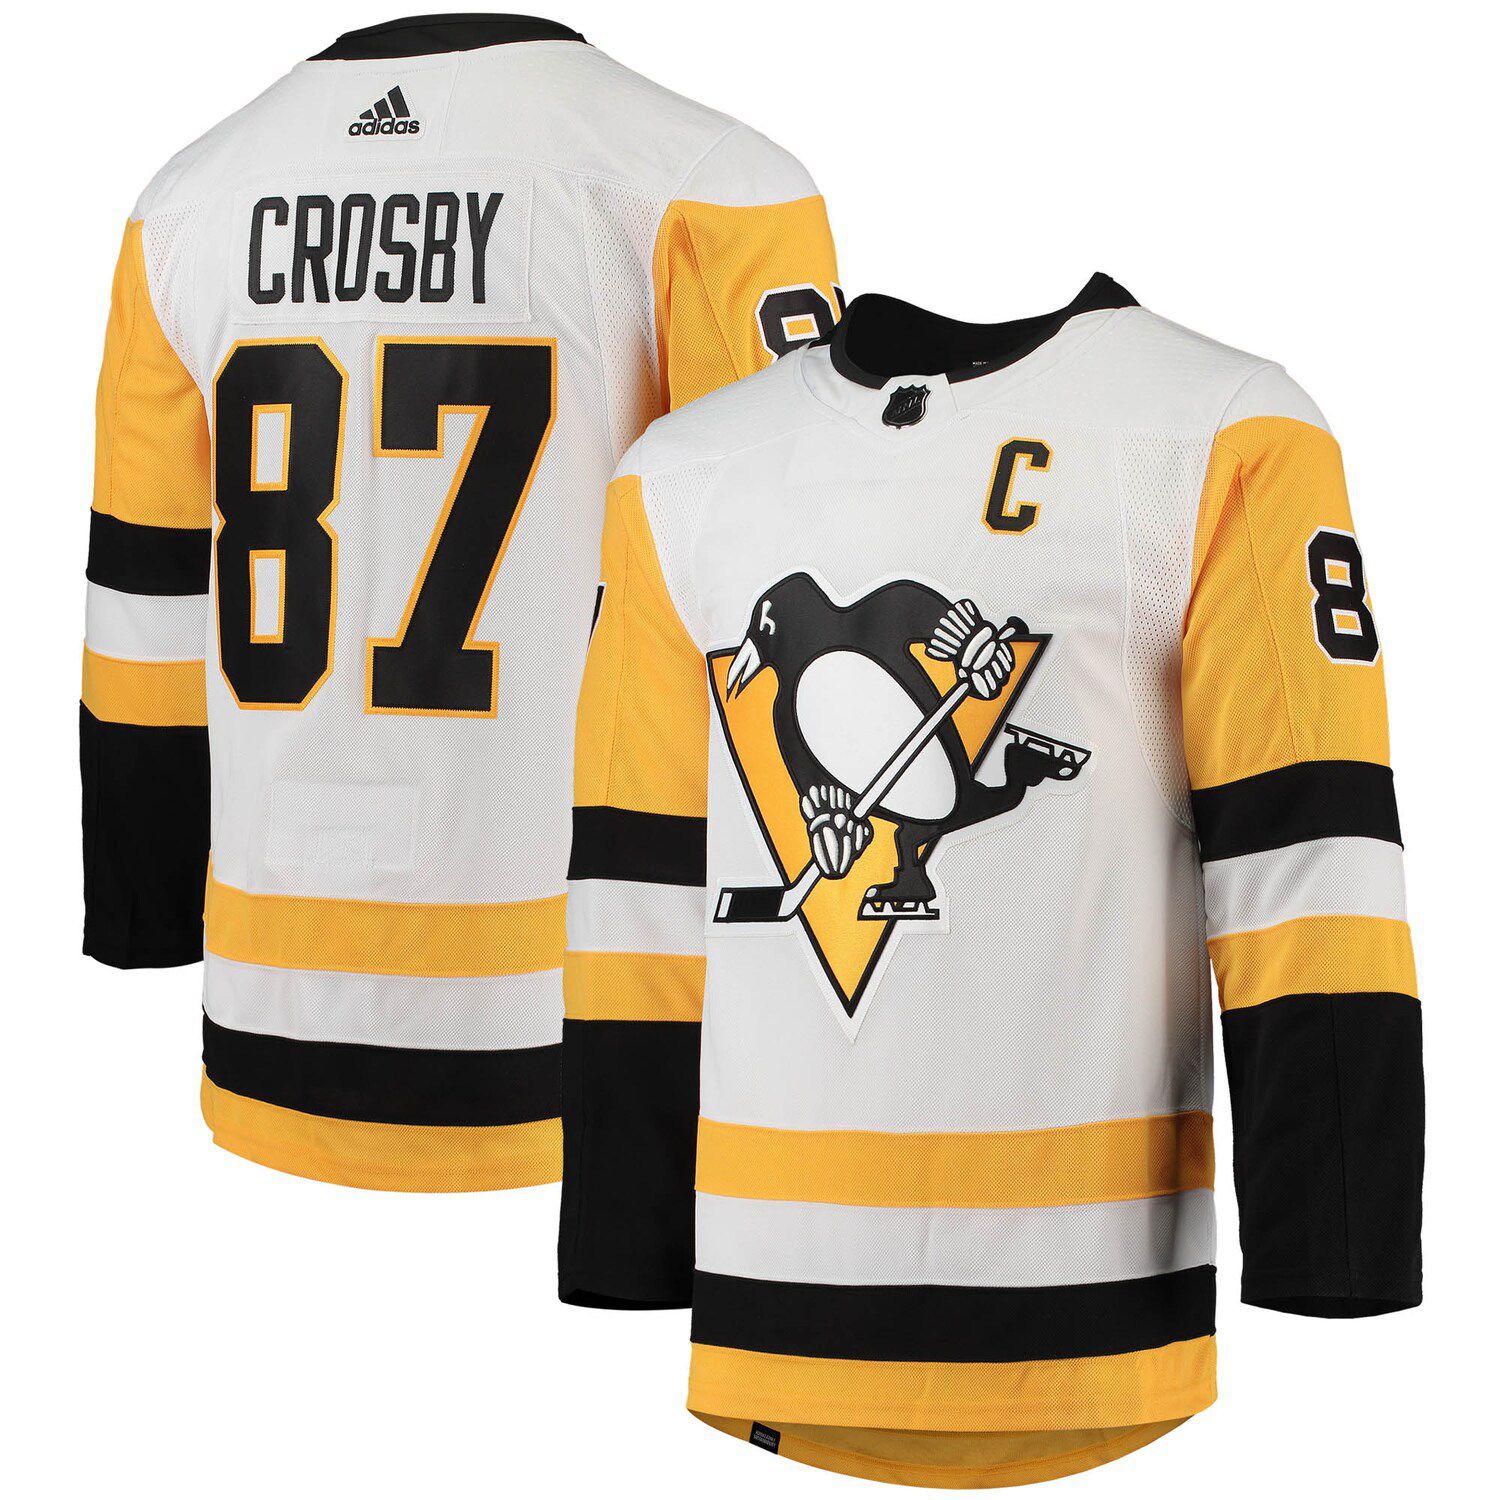 Toddler Sidney Crosby Black Pittsburgh Penguins 2021/22 Alternate Replica  Player Jersey